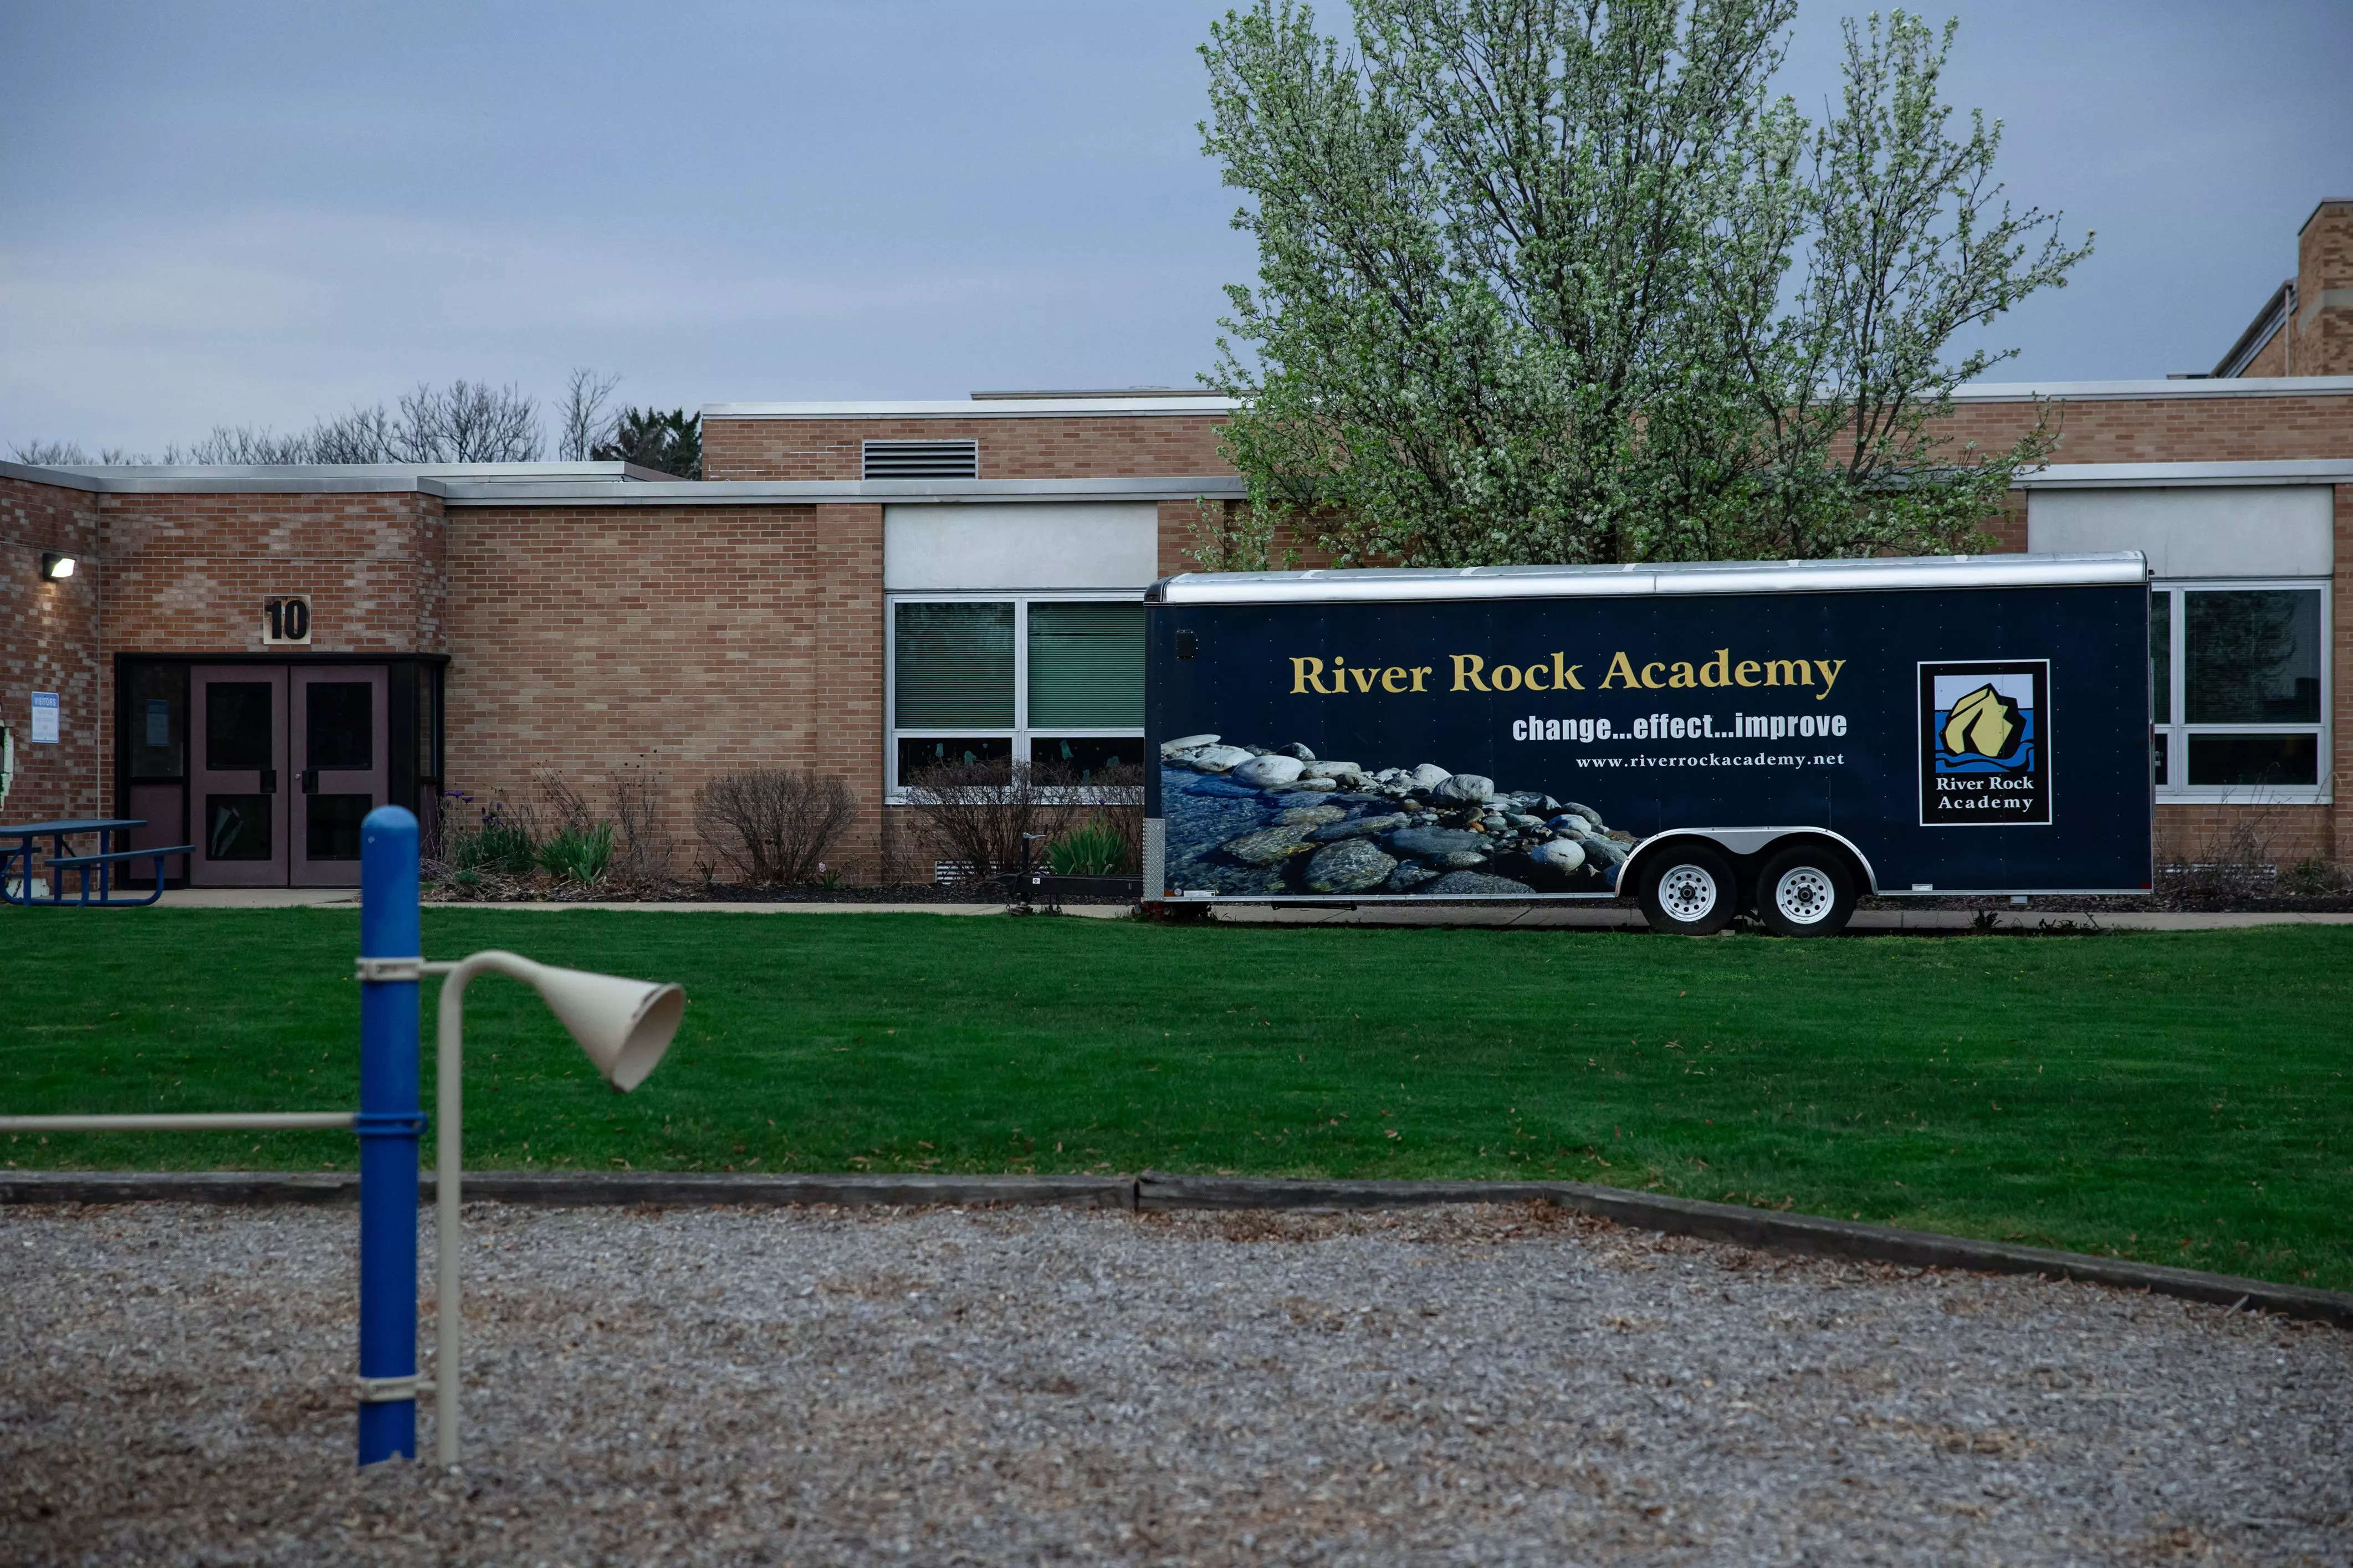 River Rock Academy vehicle in front of the school building.